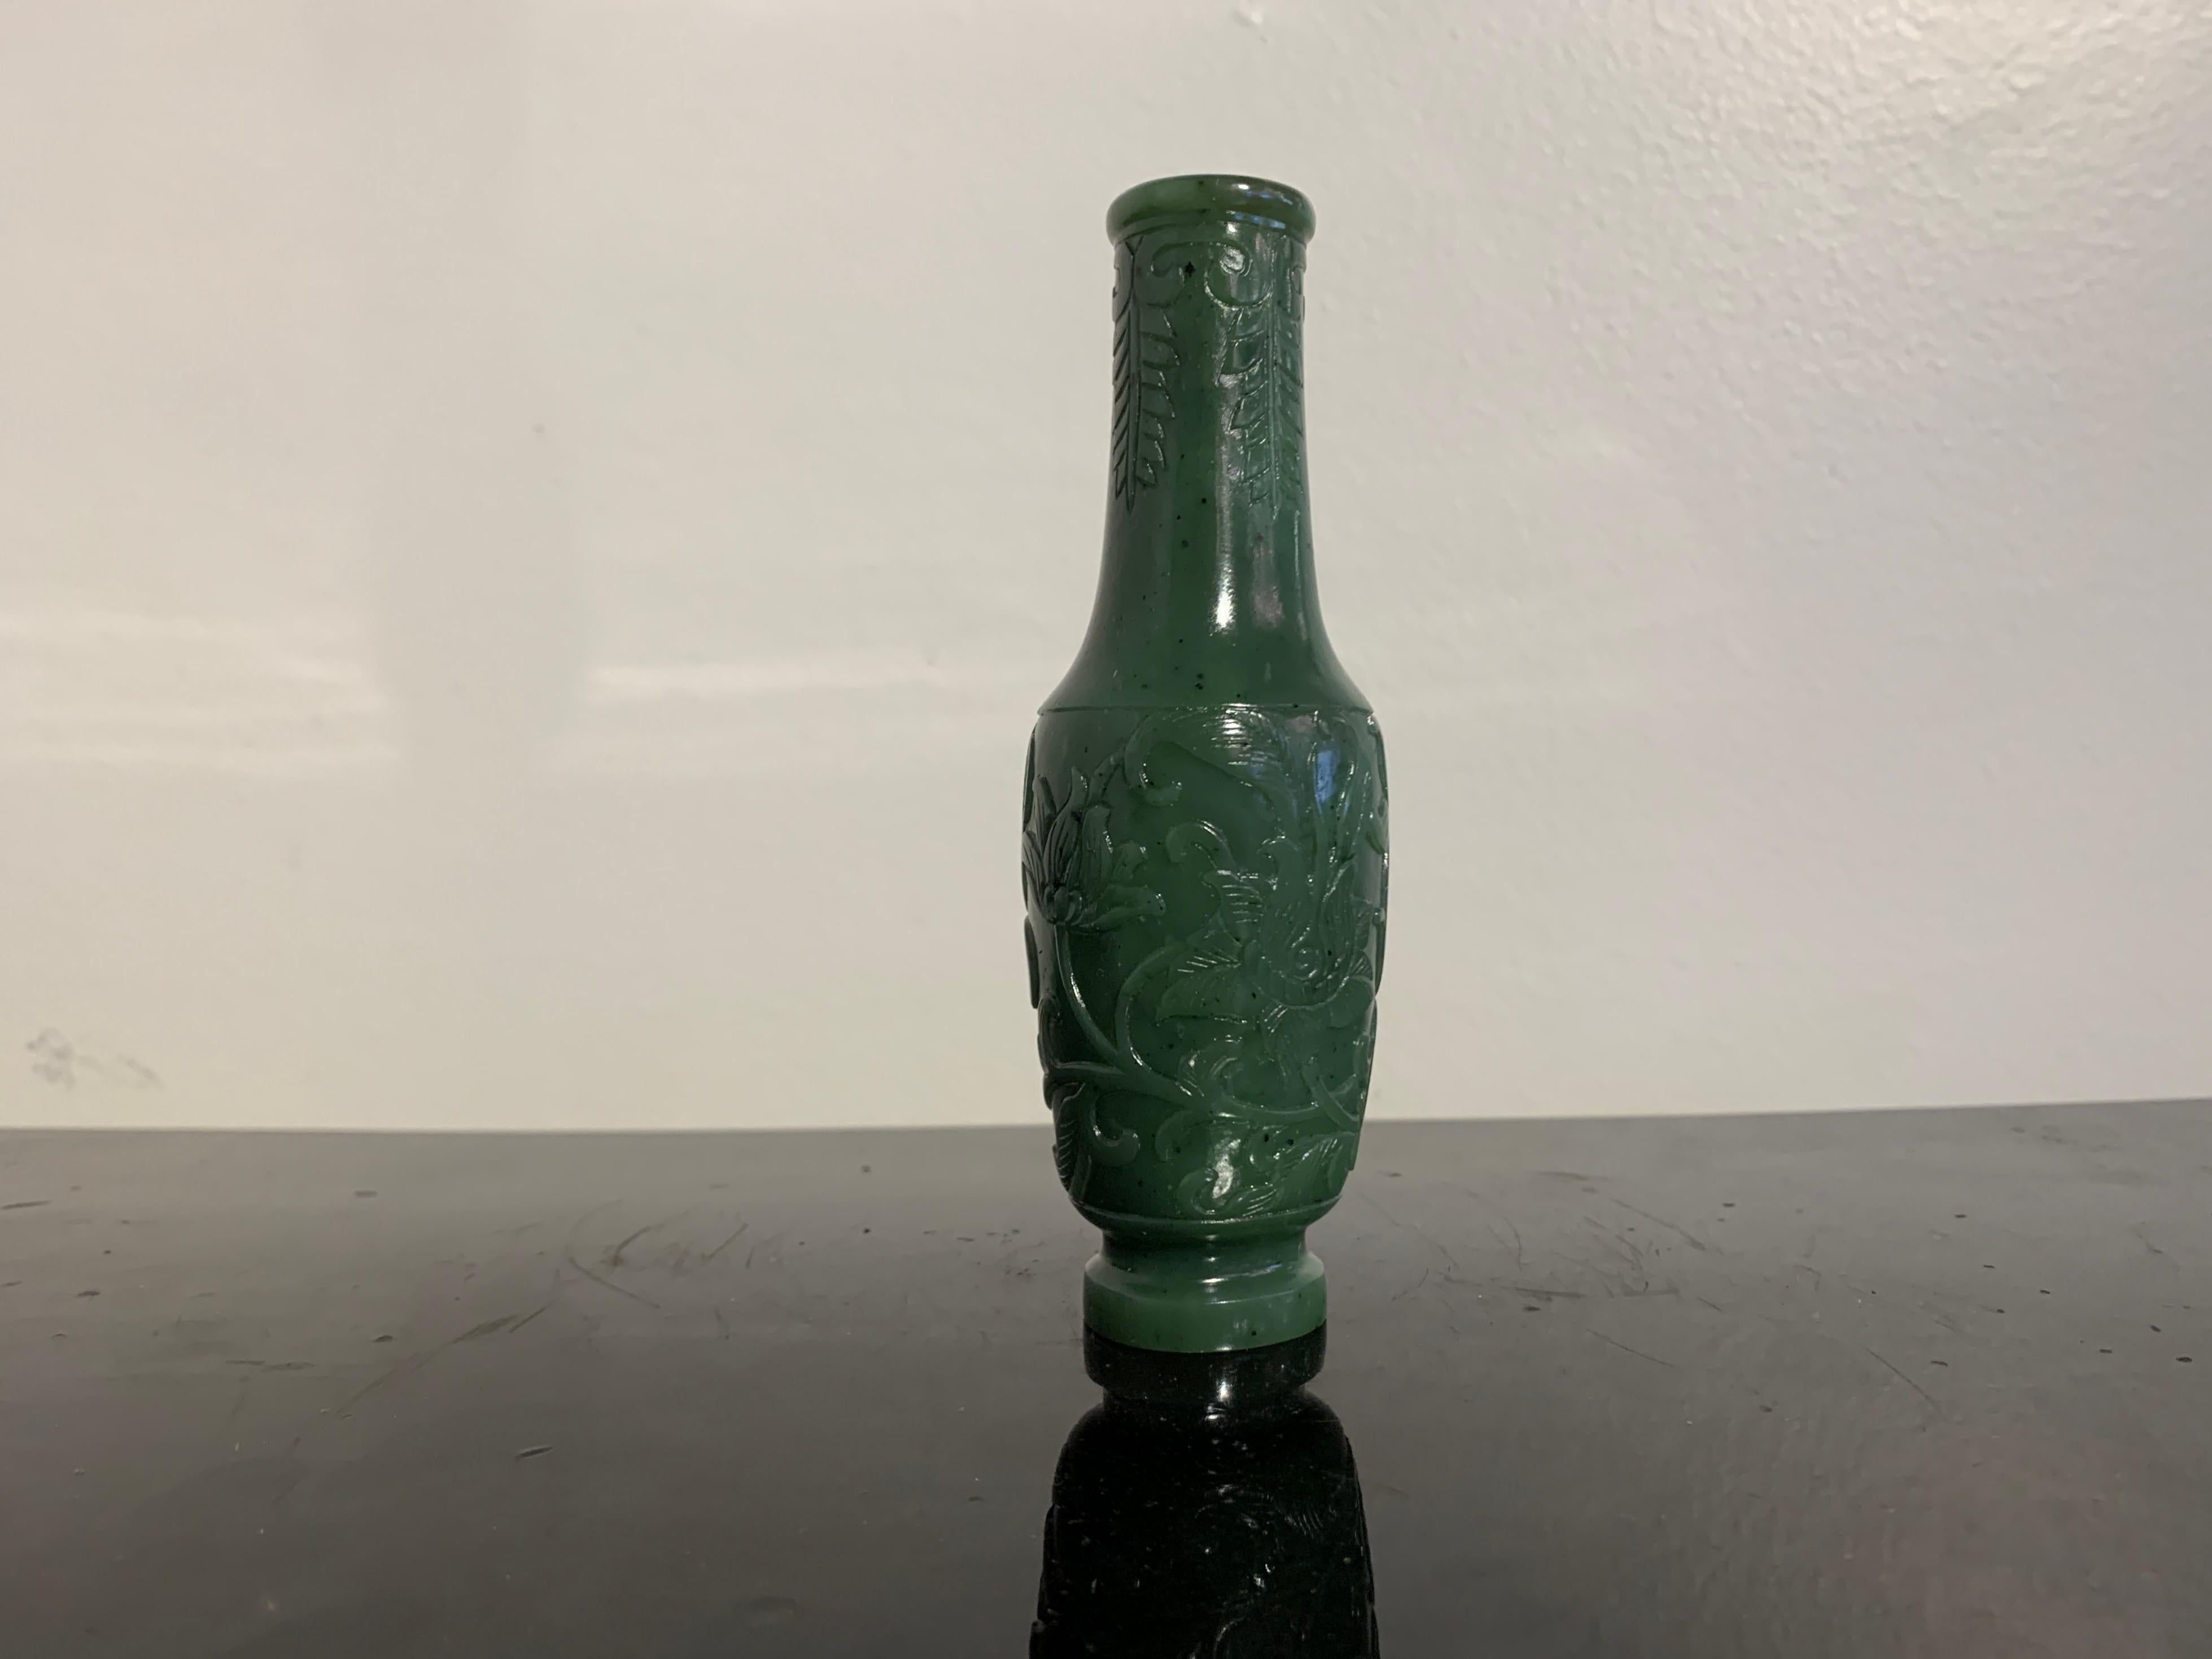 A fine and well carved Chinese spinach jade incense tool vase, Qing Dynasty, Qianlong or Jiaqing Period, 18th/19th century, China.

The small jade vase of medium dark green hue with black flecks throughout, commonly known as spinach jade. The jade